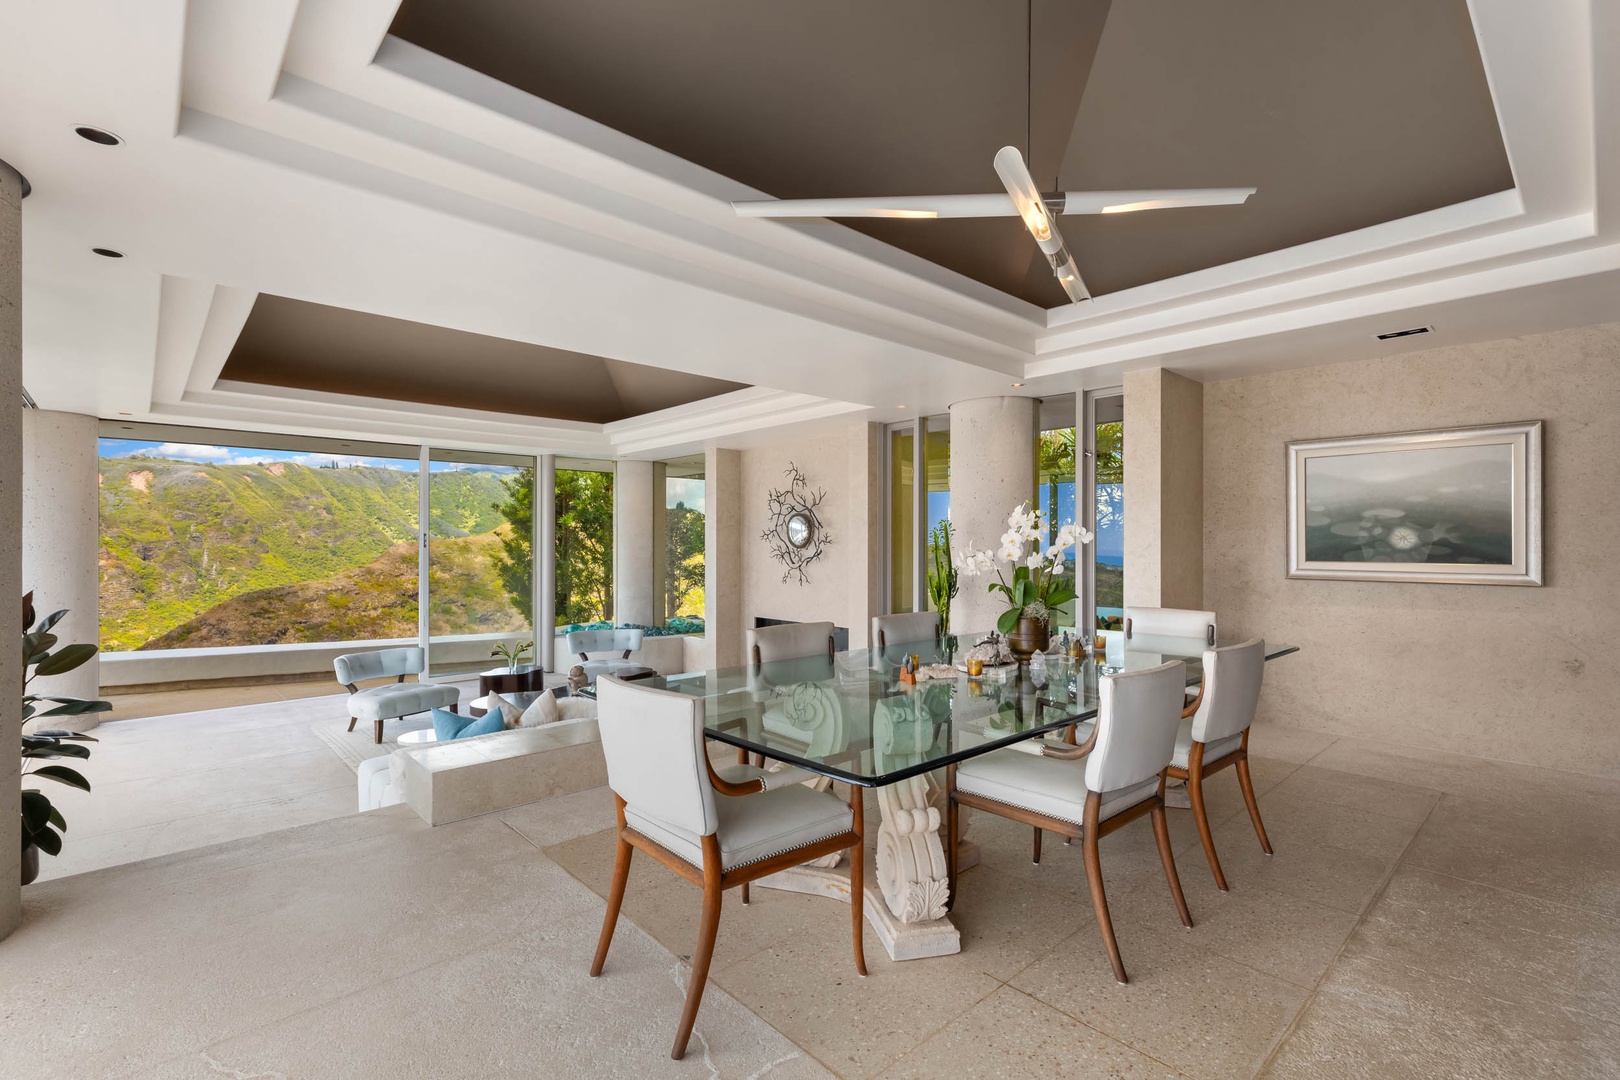 Honolulu Vacation Rentals, Sky Ridge House - Elegant glass dining table with sleek white chairs for six.